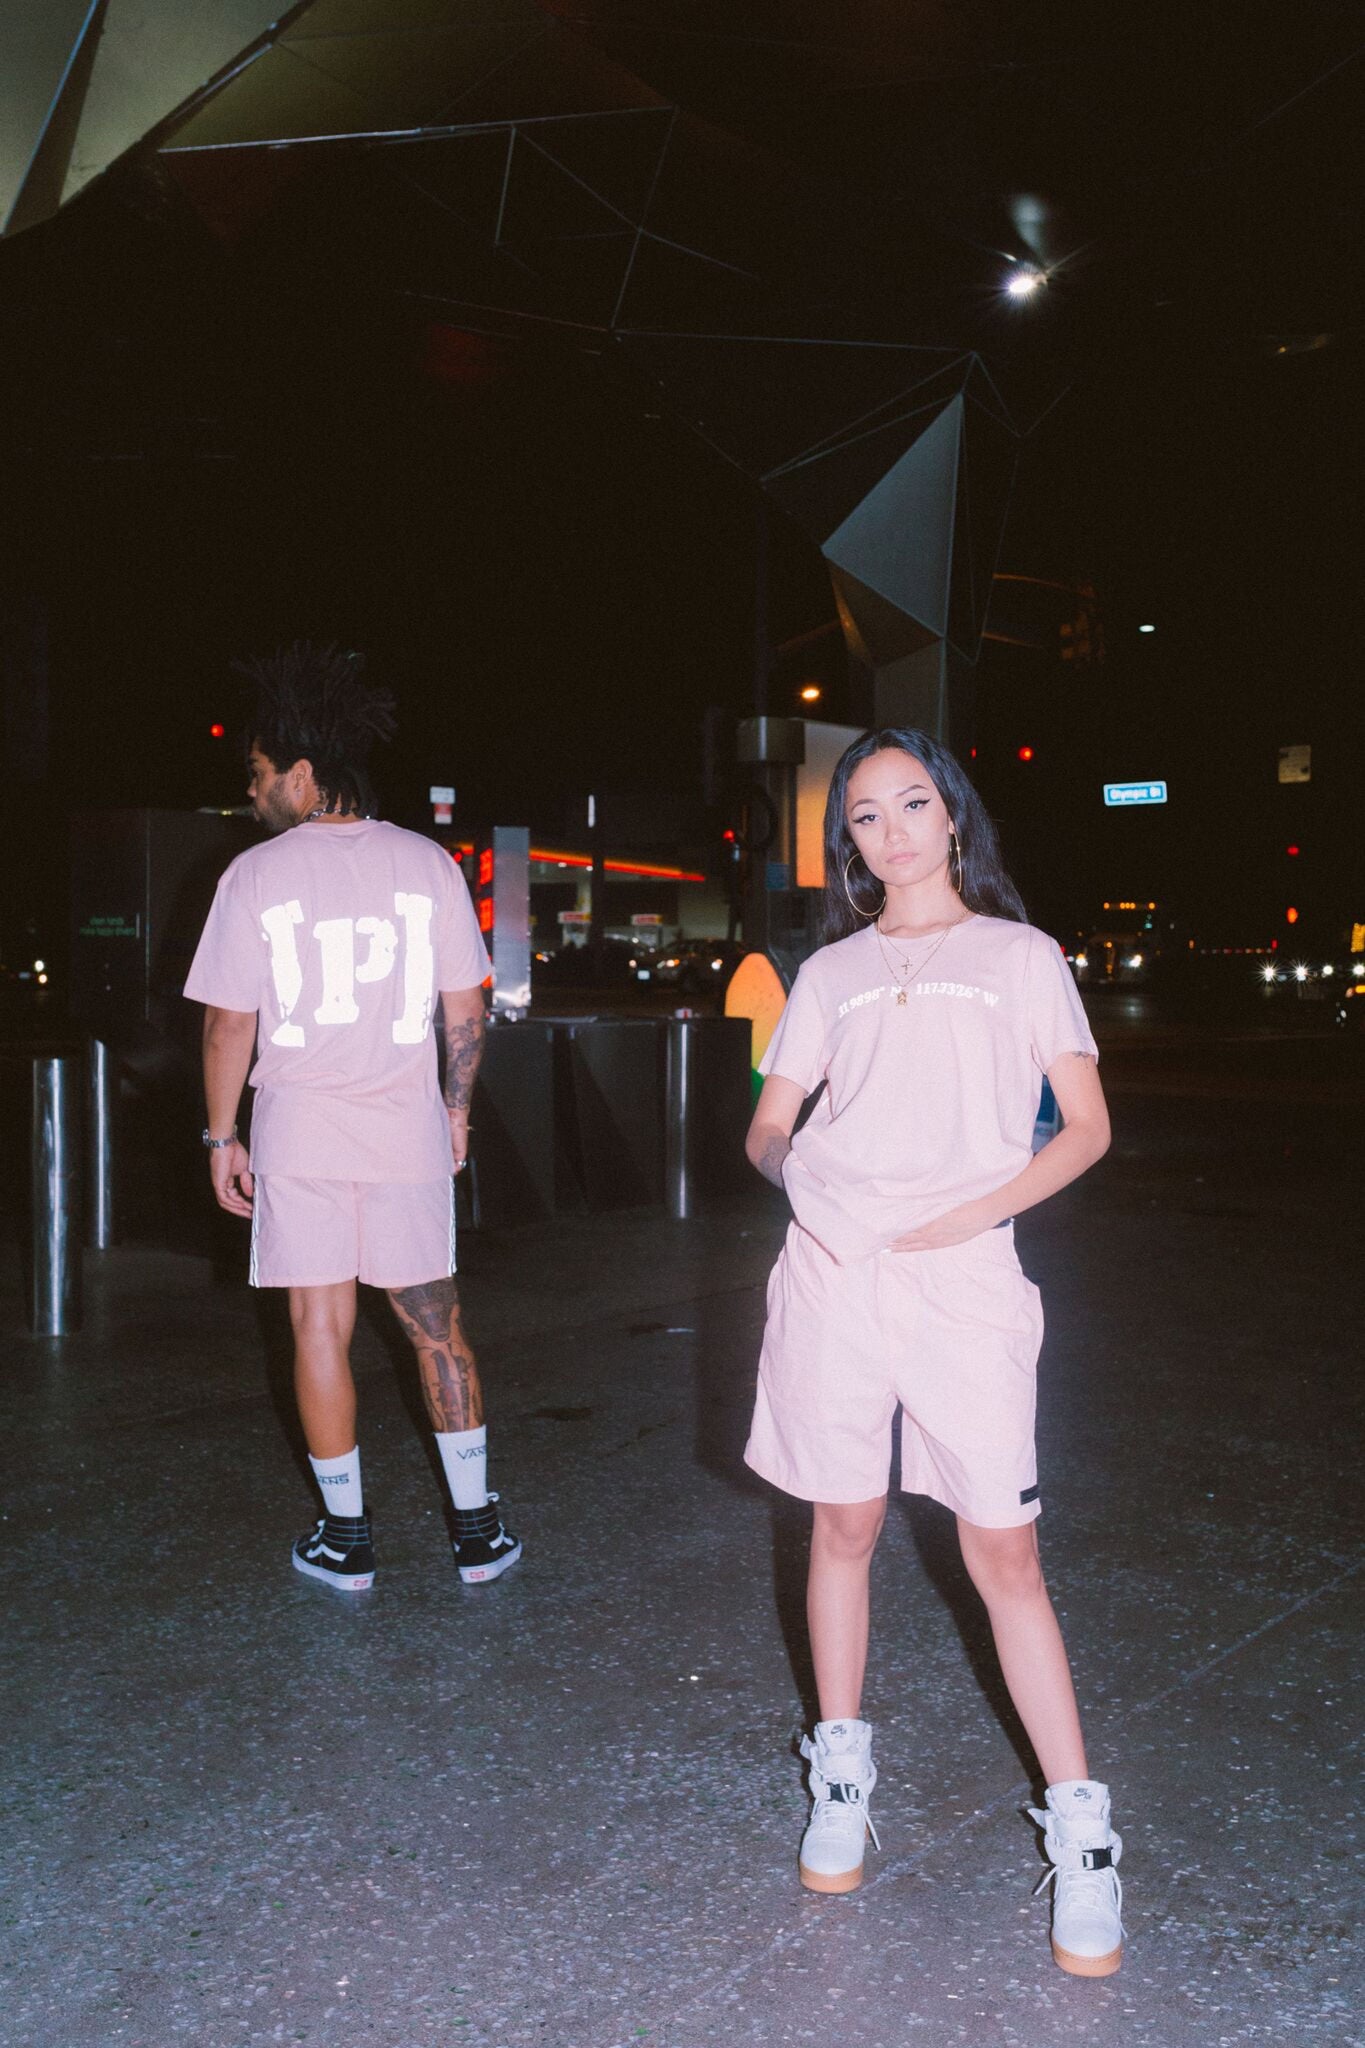 Location T-Shirt [pale pink]